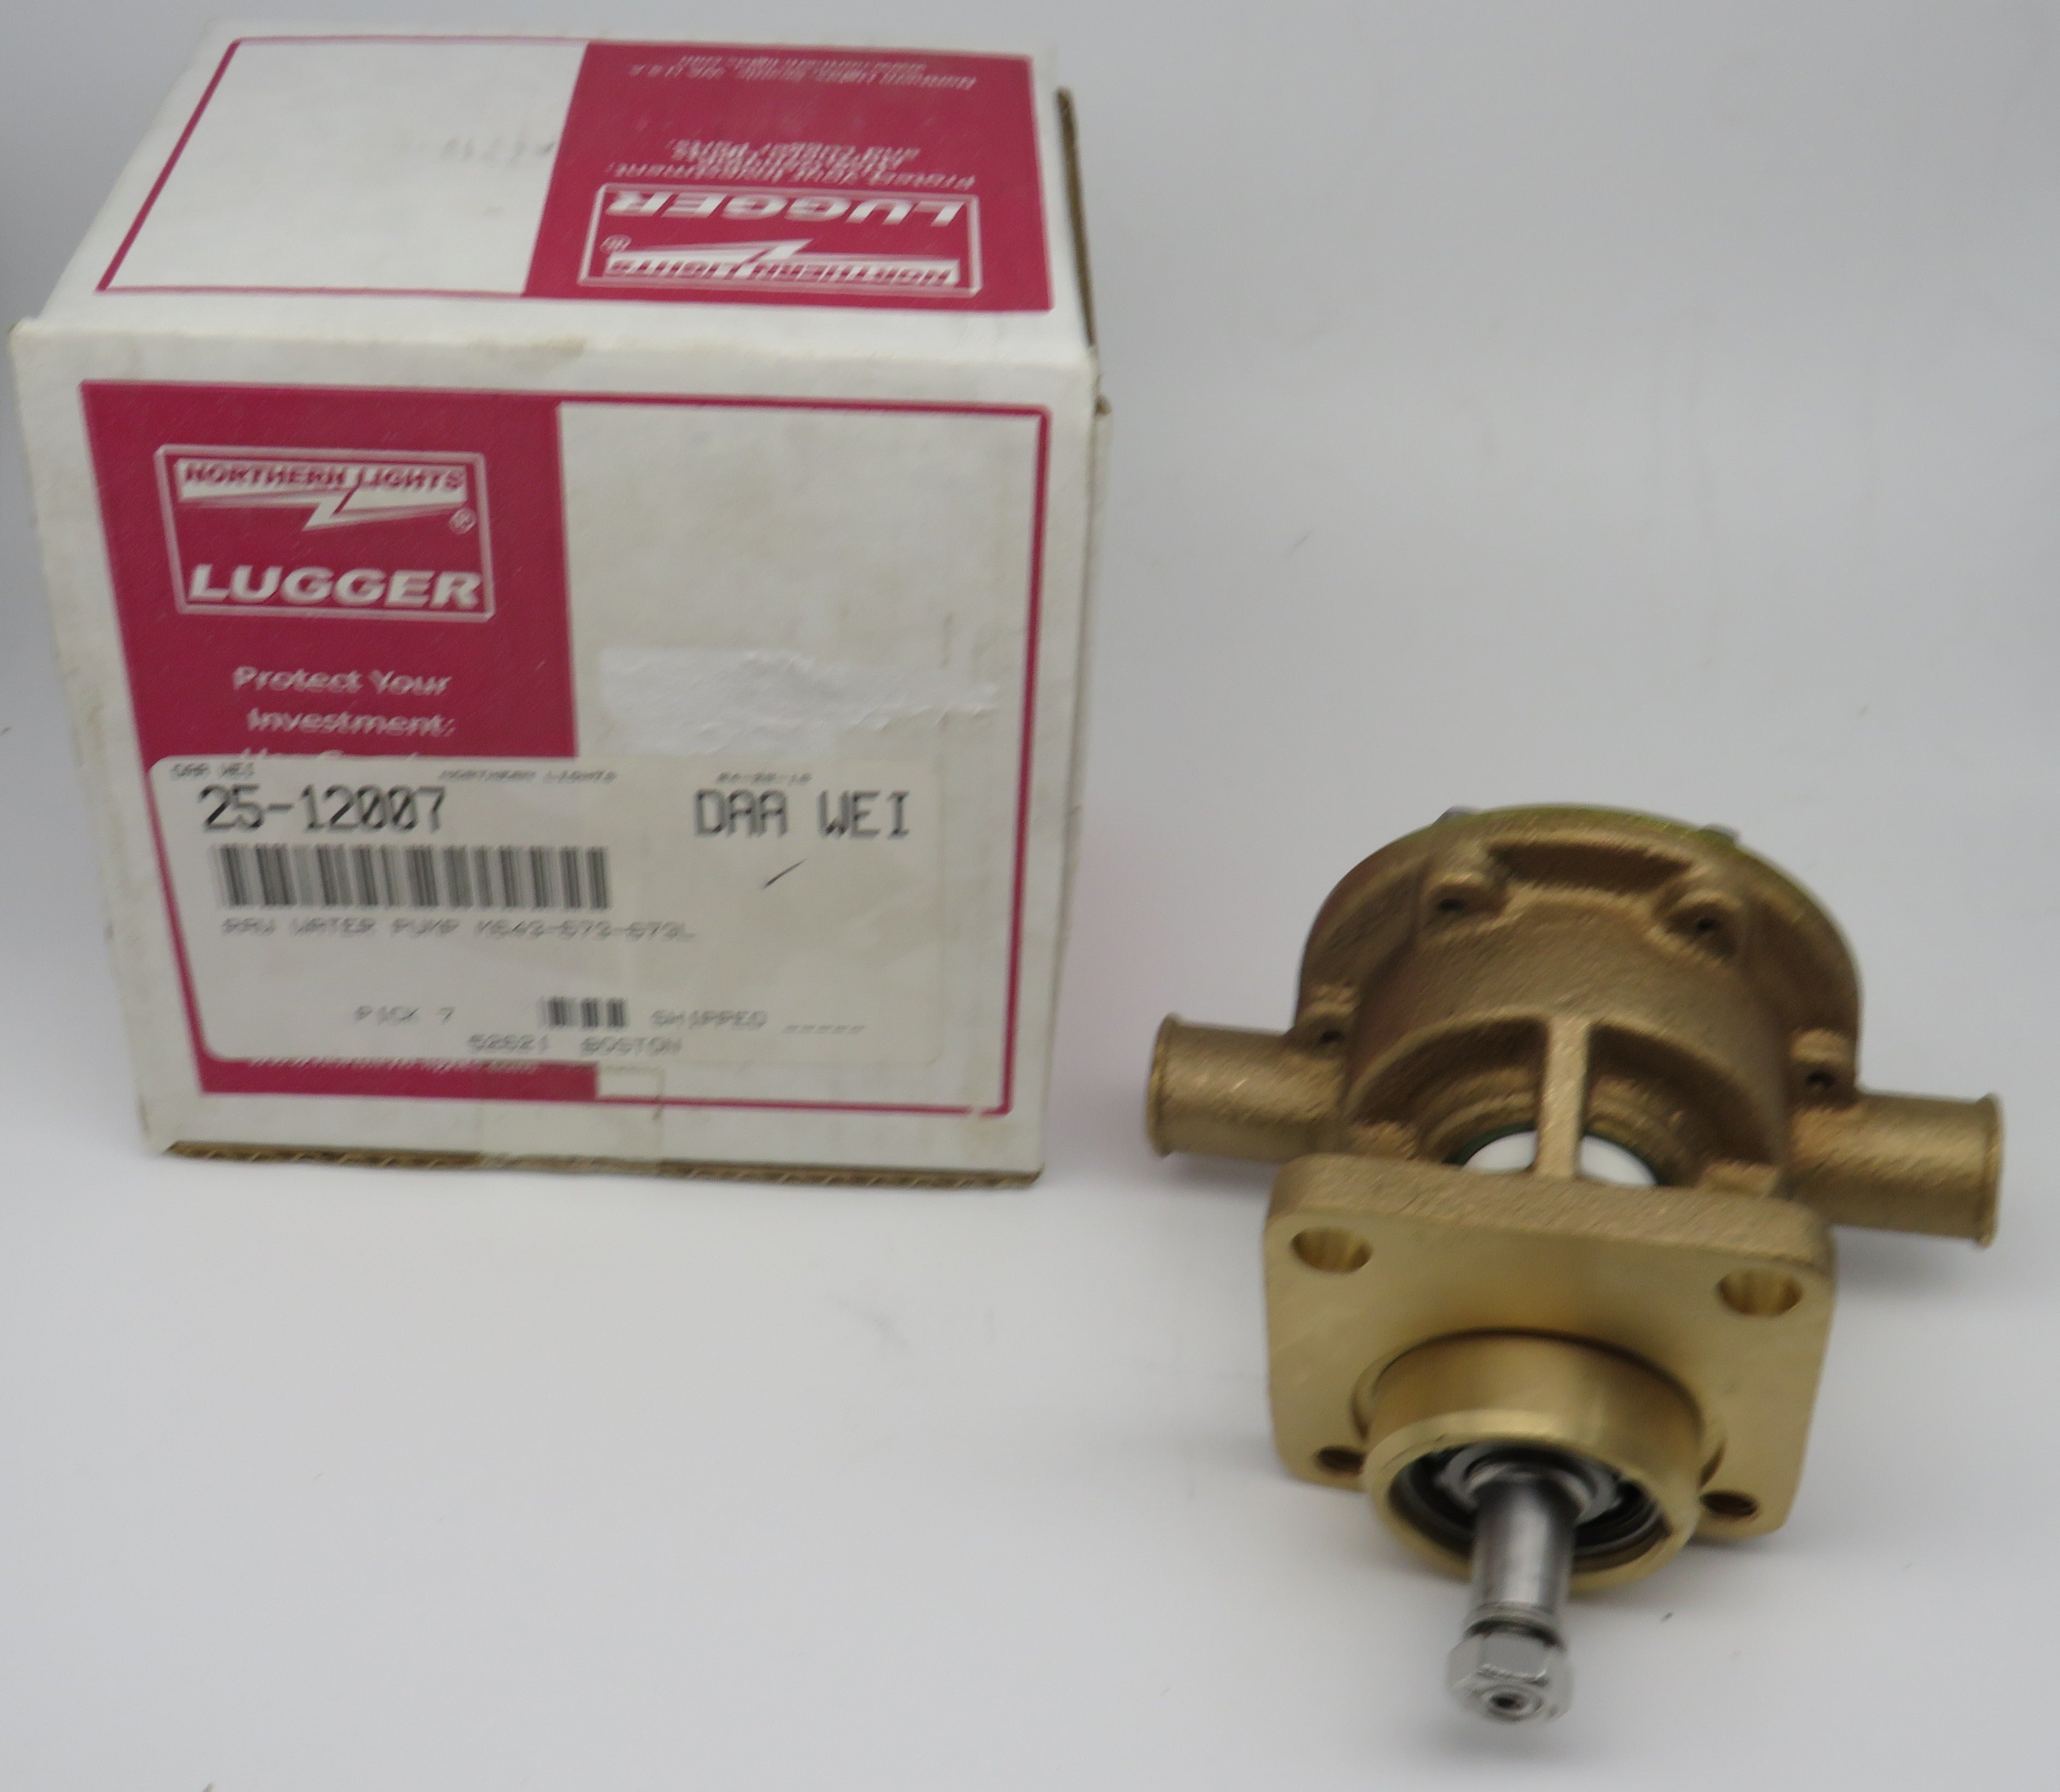 25-12007 Northern Lights Lugger Raw Water Pump for M643-673-673L